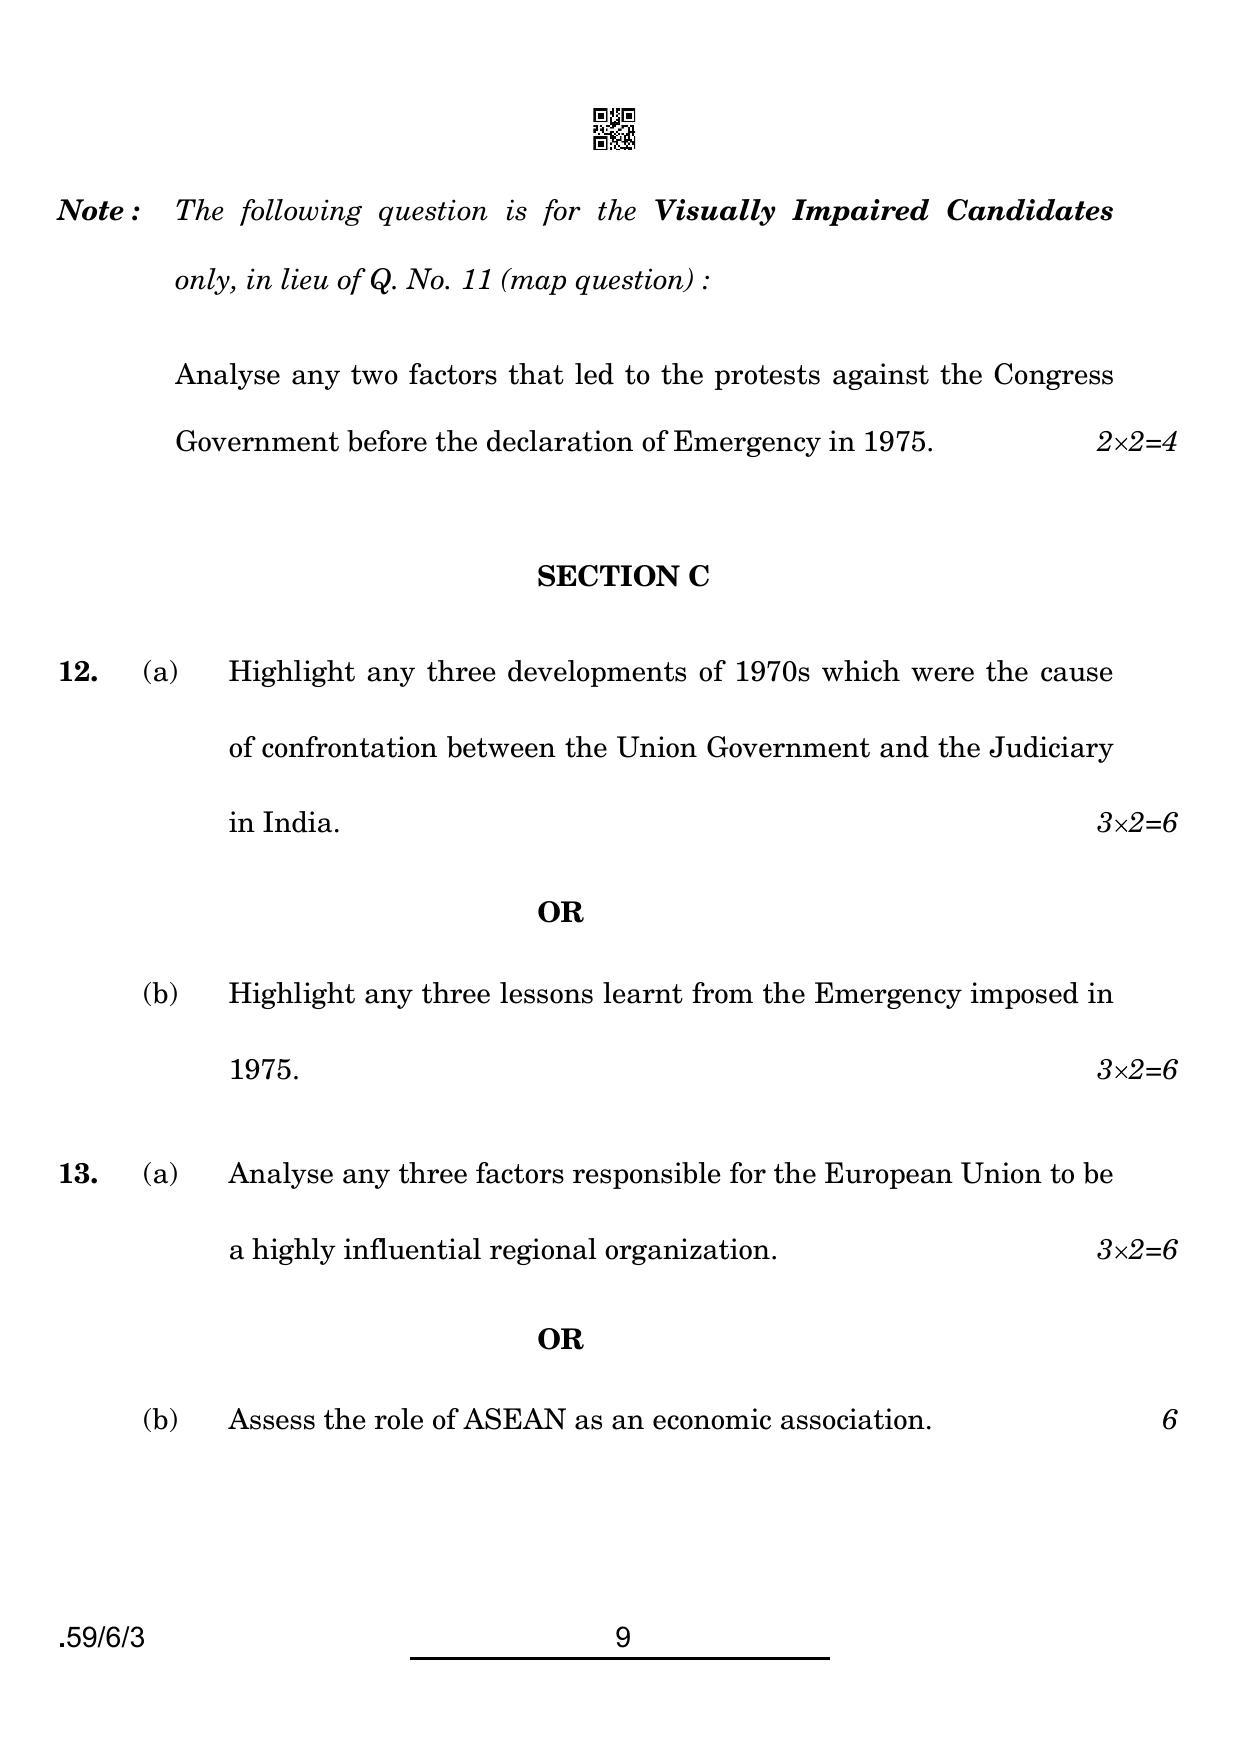 CBSE Class 12 59-6-3 POL SCIENCE 2022 Compartment Question Paper - Page 9